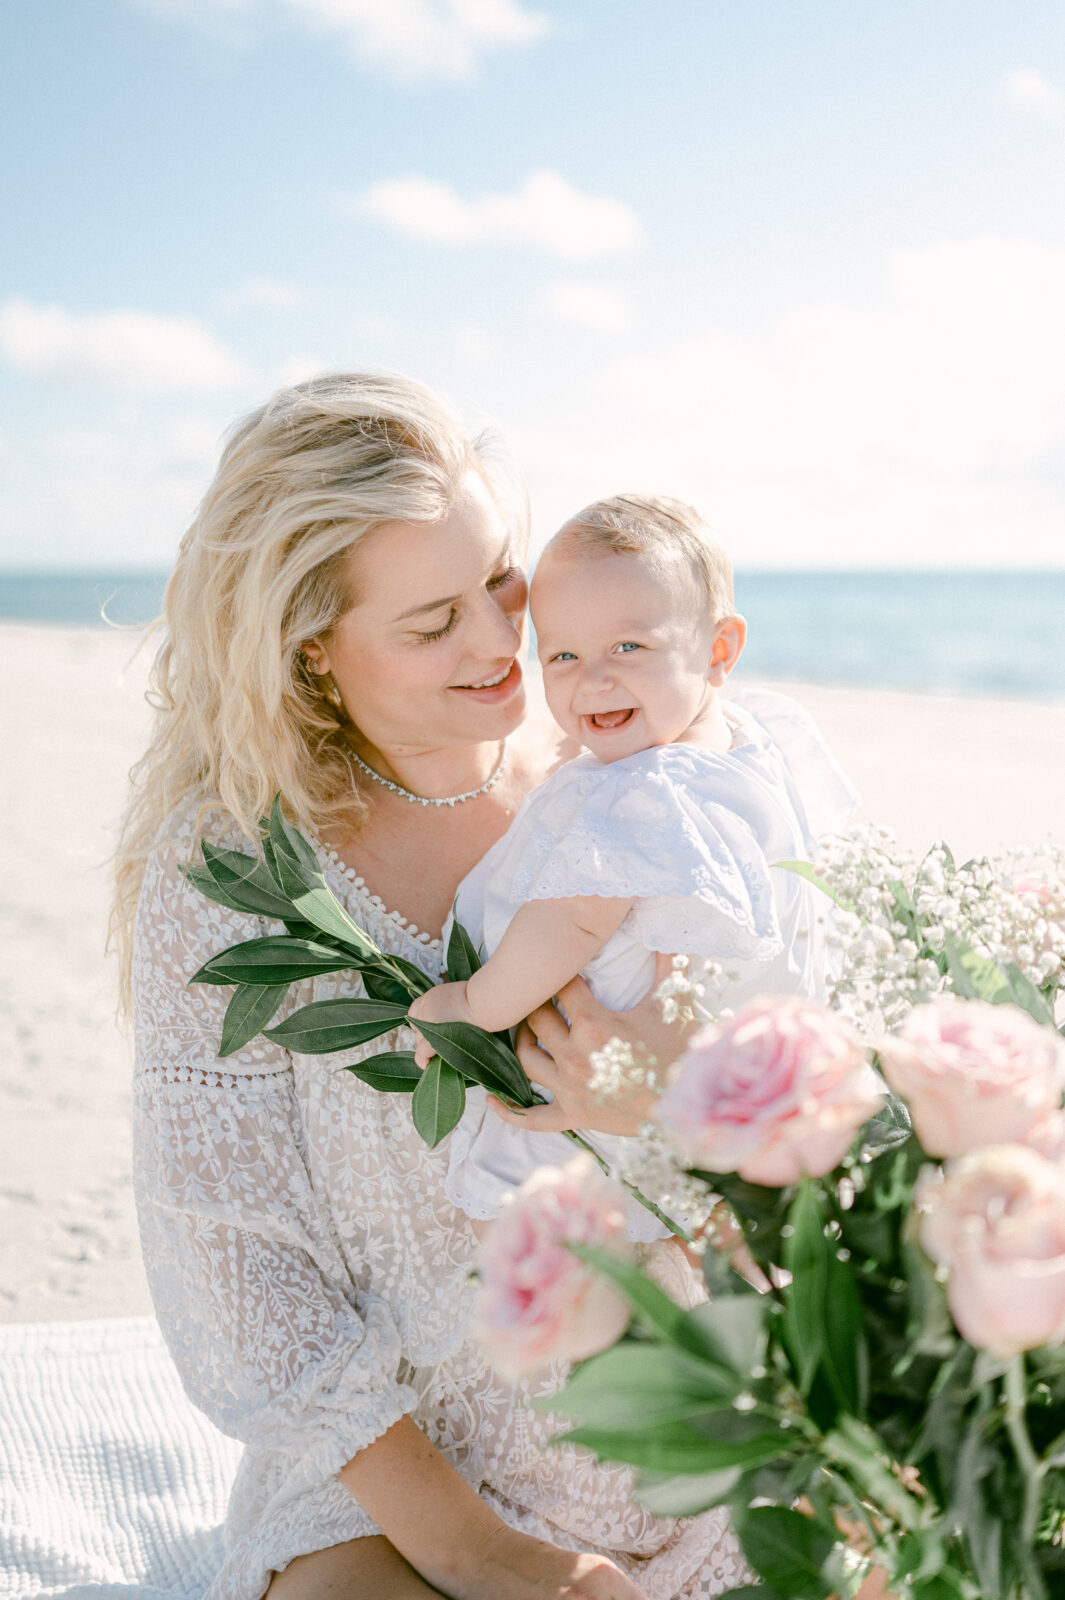 Mom snuggling with her baby girl on the beach with flowers